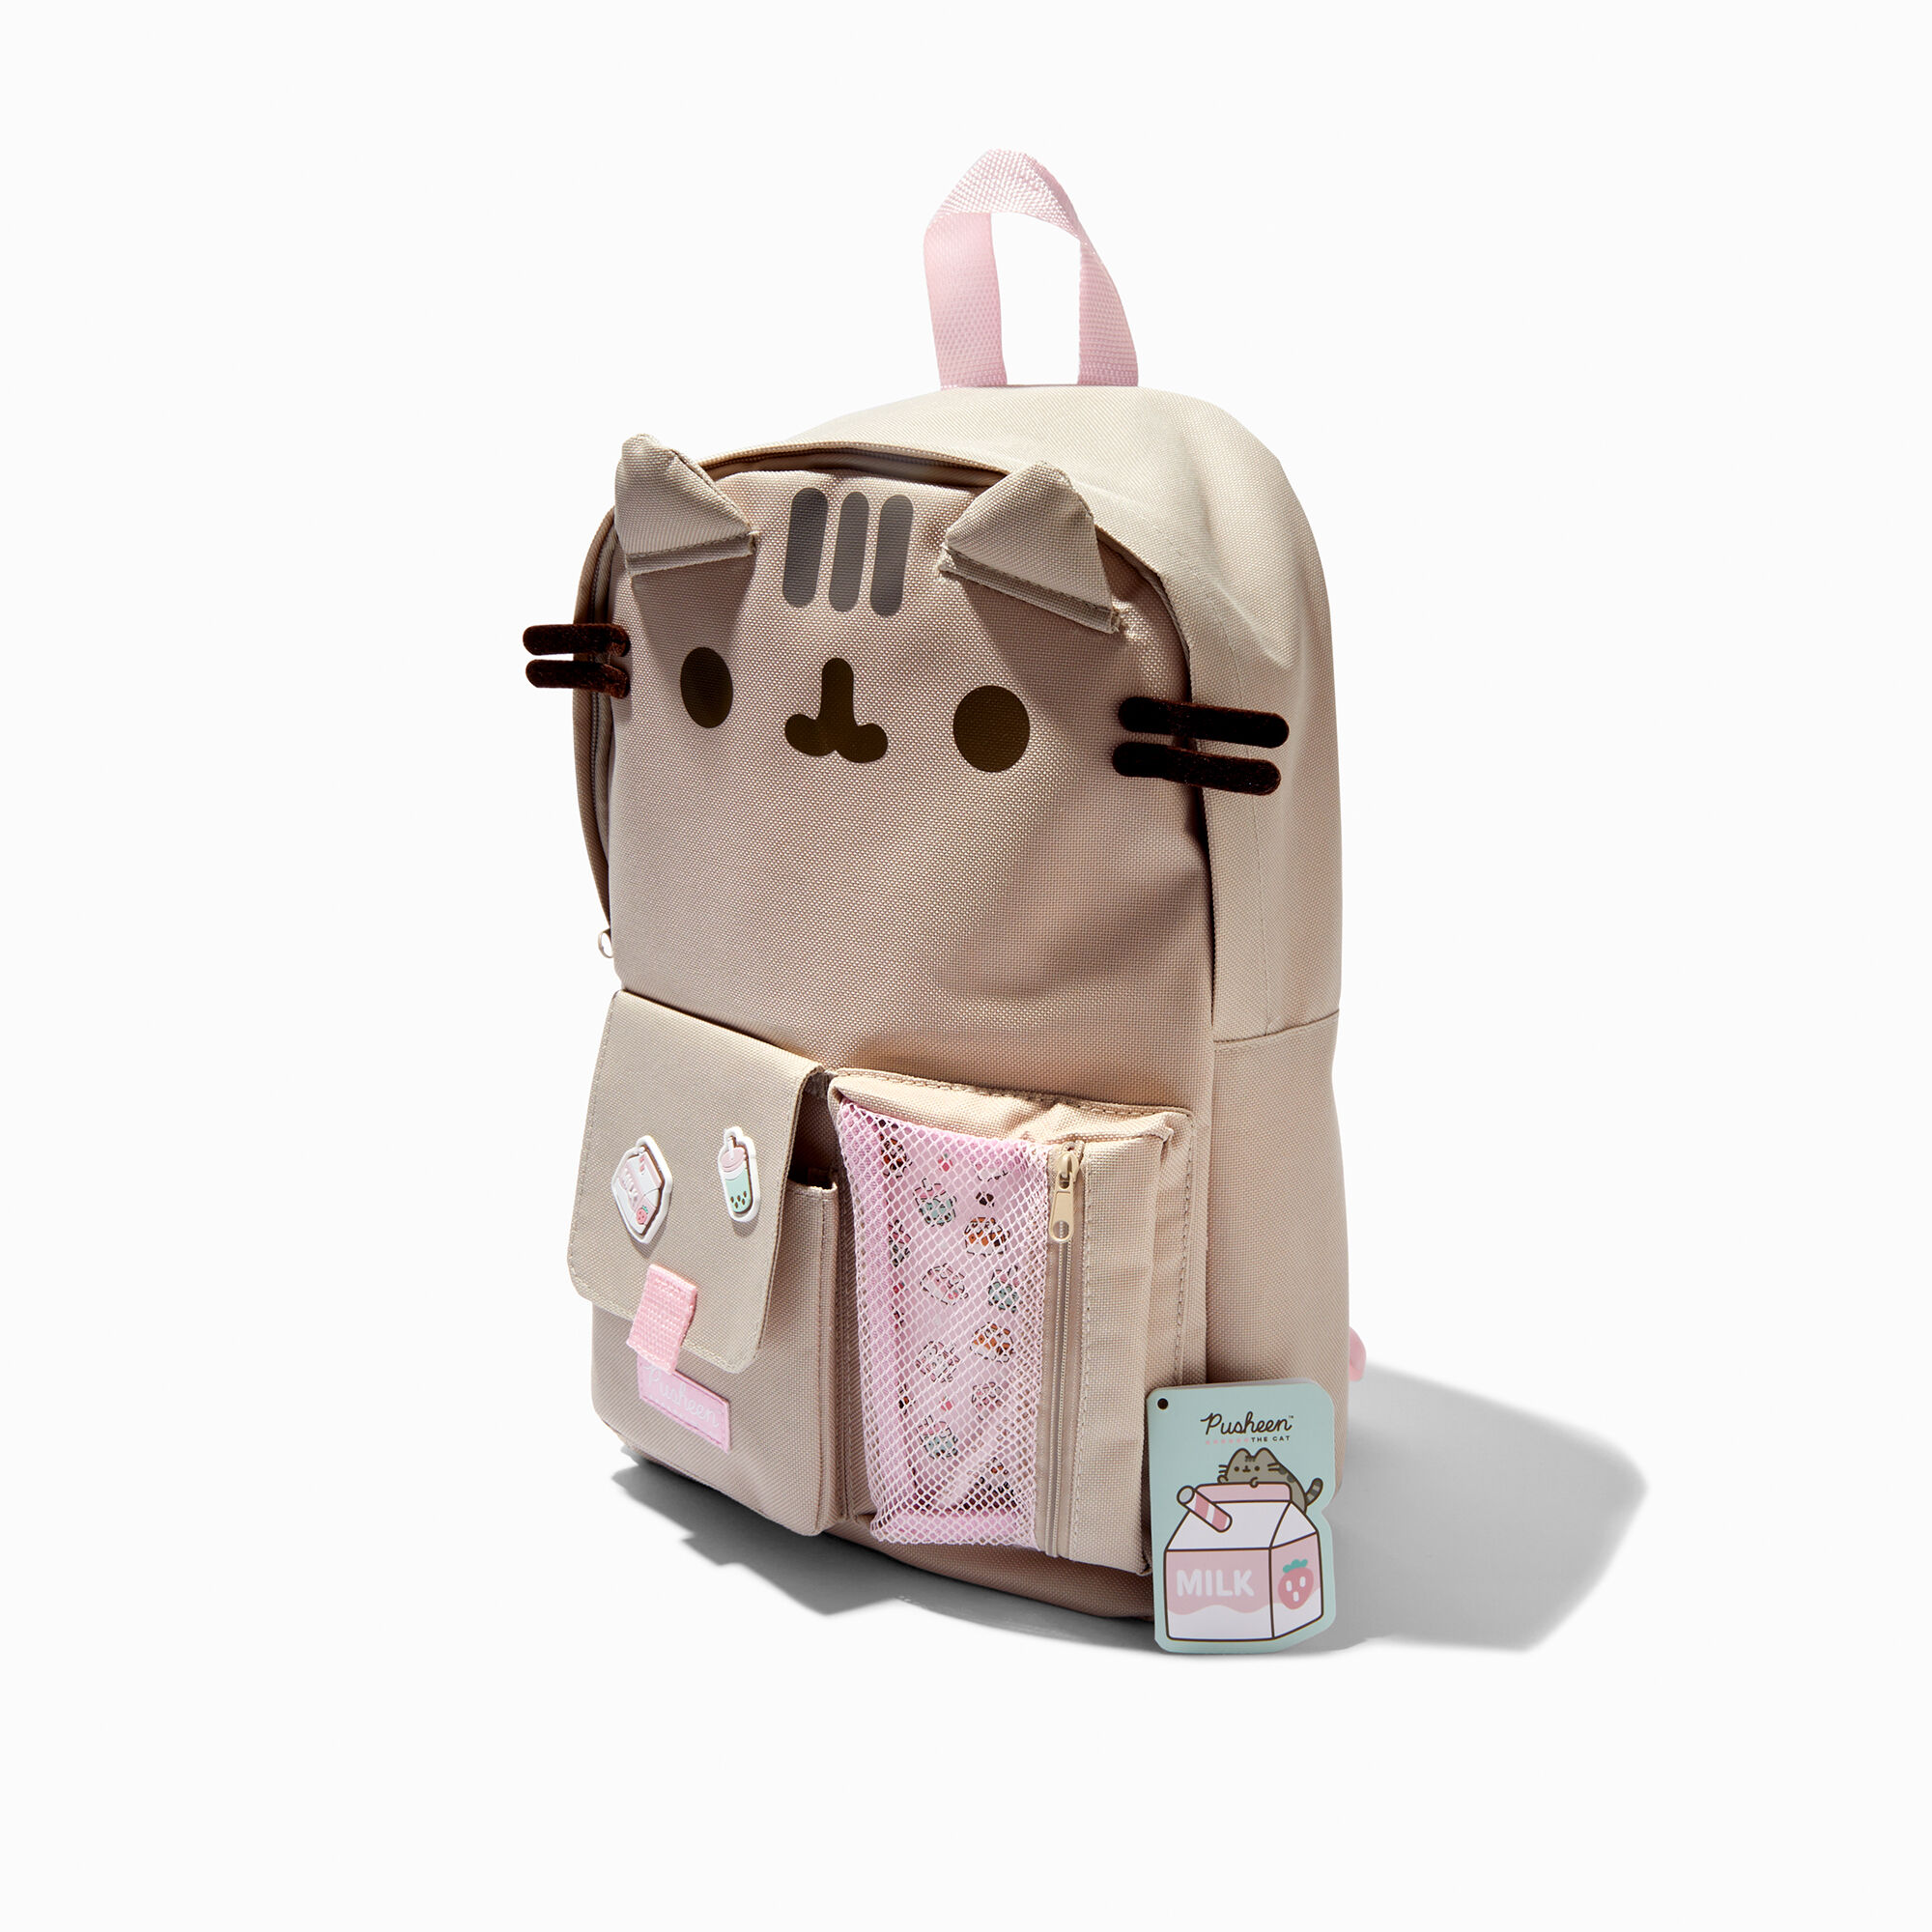 View Claires Pusheen Large Backpack Stationery Set information